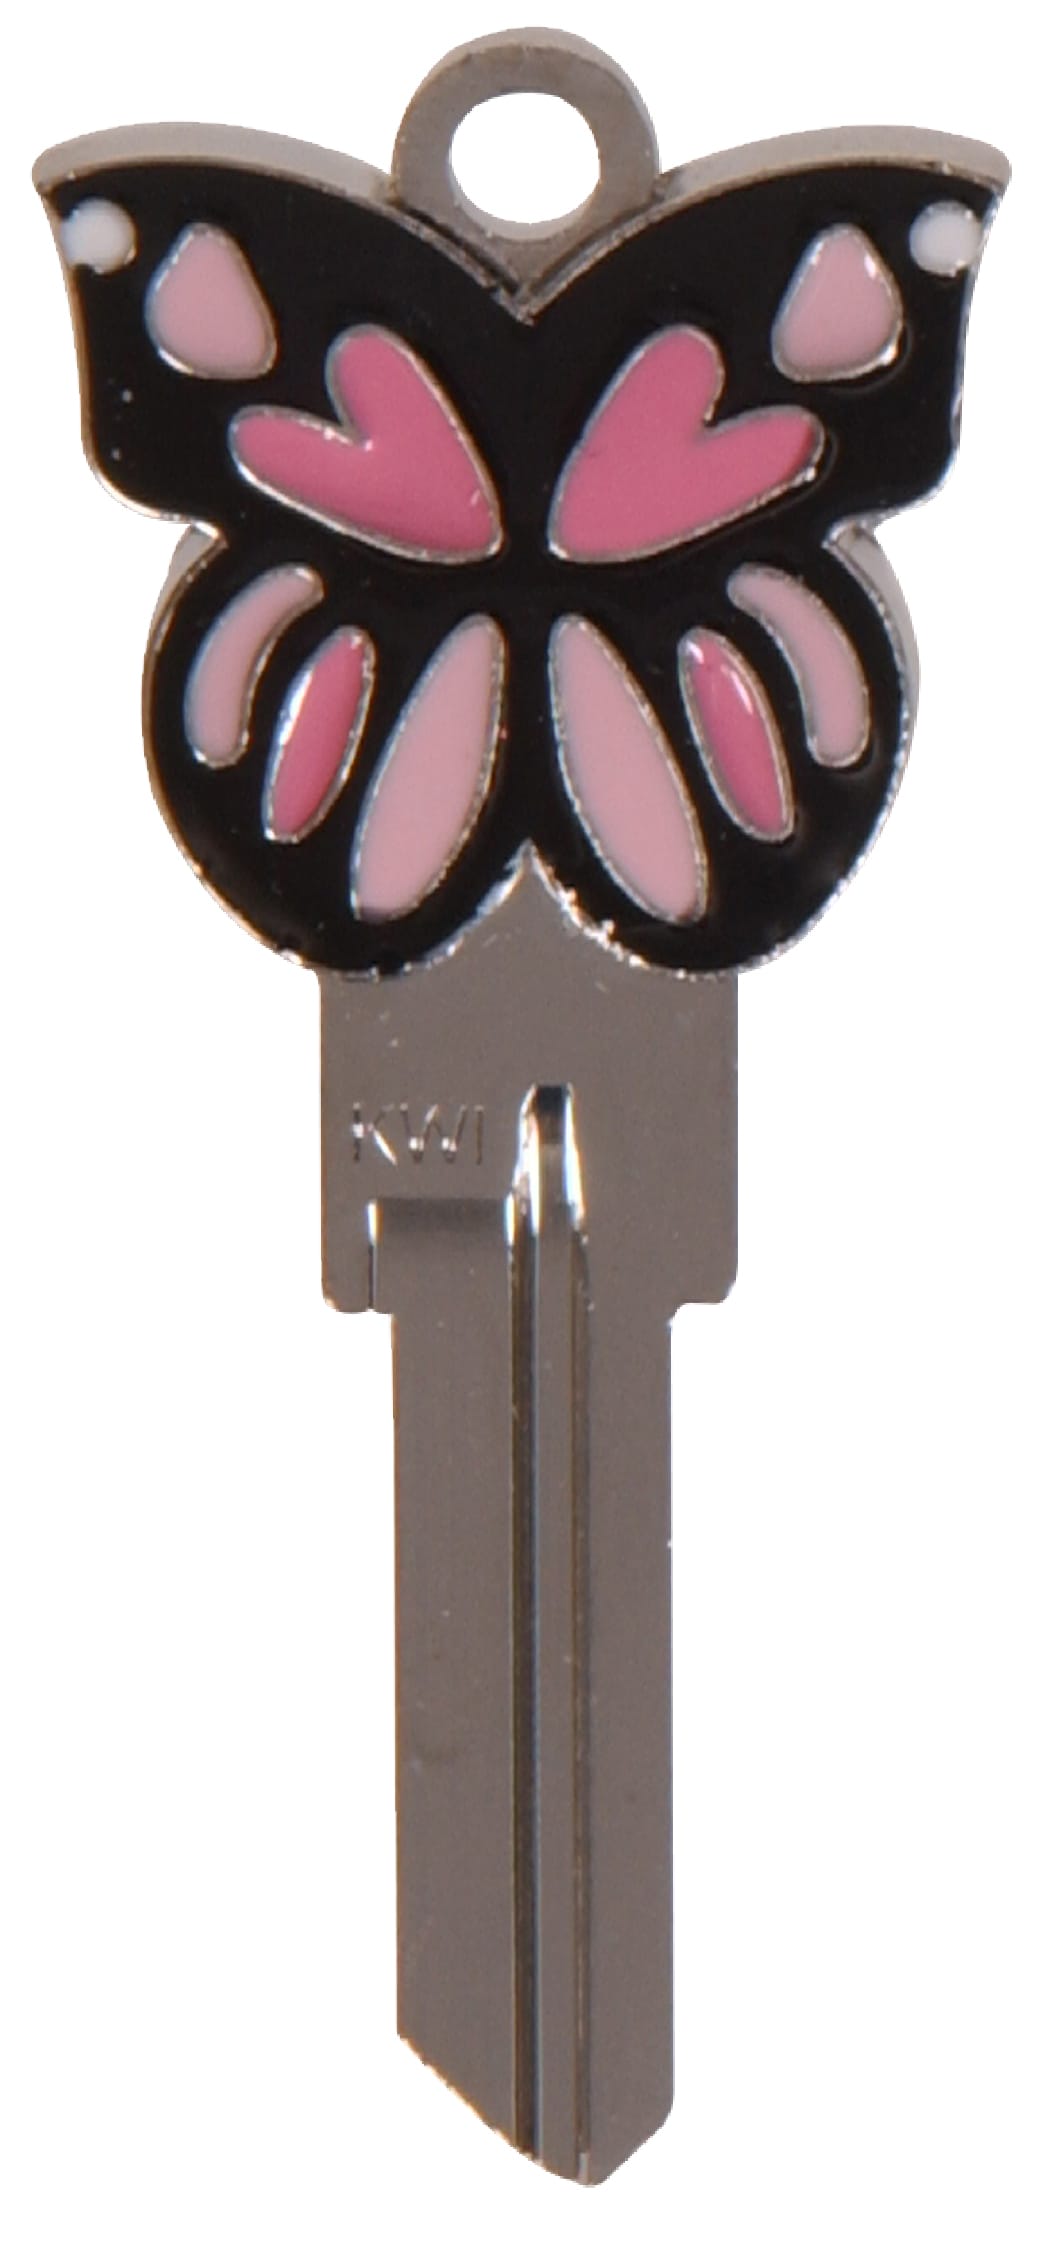 Hillman Silver/Black/Pink #66 Brass House/Entry Key Blank at Lowes.com